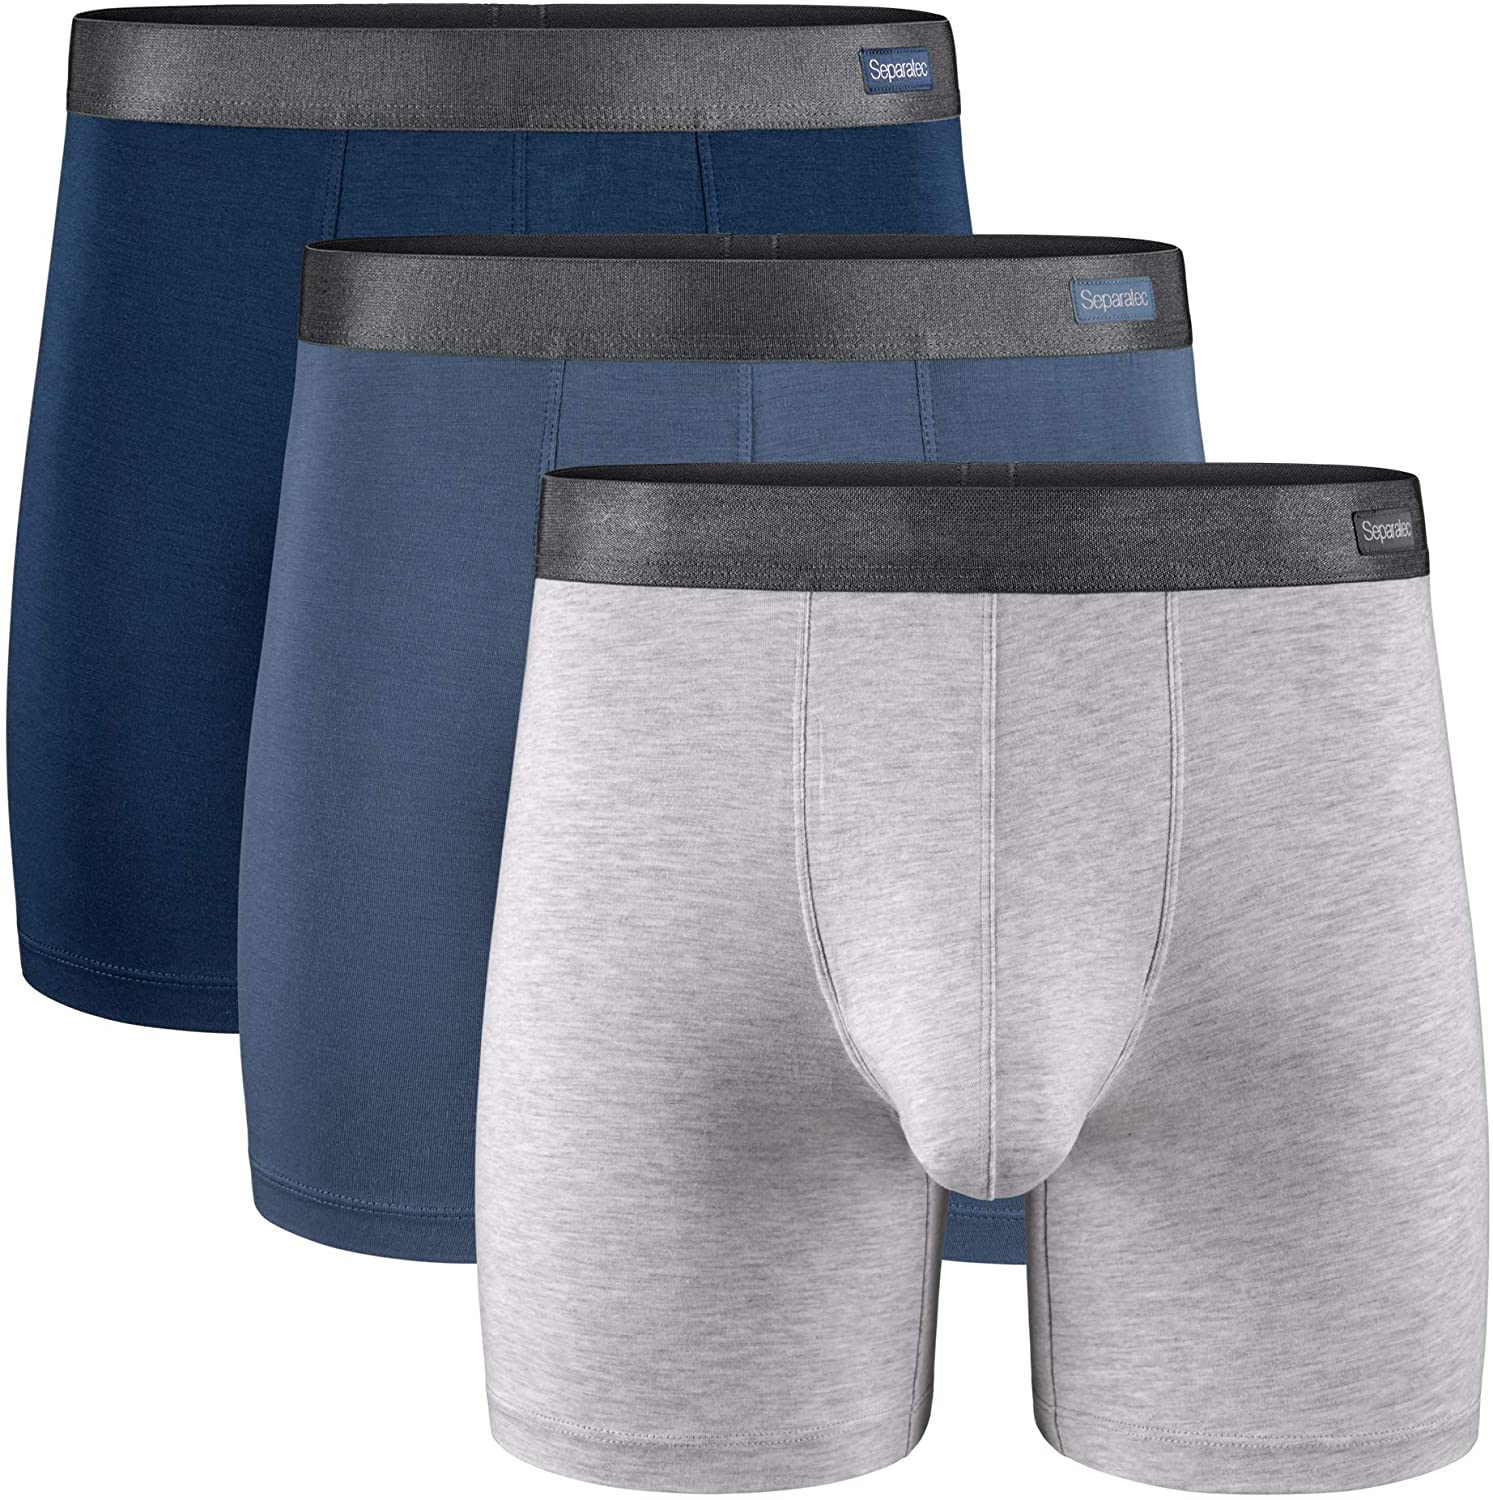 Buy Separatec Men's Underwear 3 Pack Basic Bamboo Rayon Soft Breathable  Dual Pouch Boxer Briefs(M,Navy Blue/Moonlight Blue/Heather Gray) at